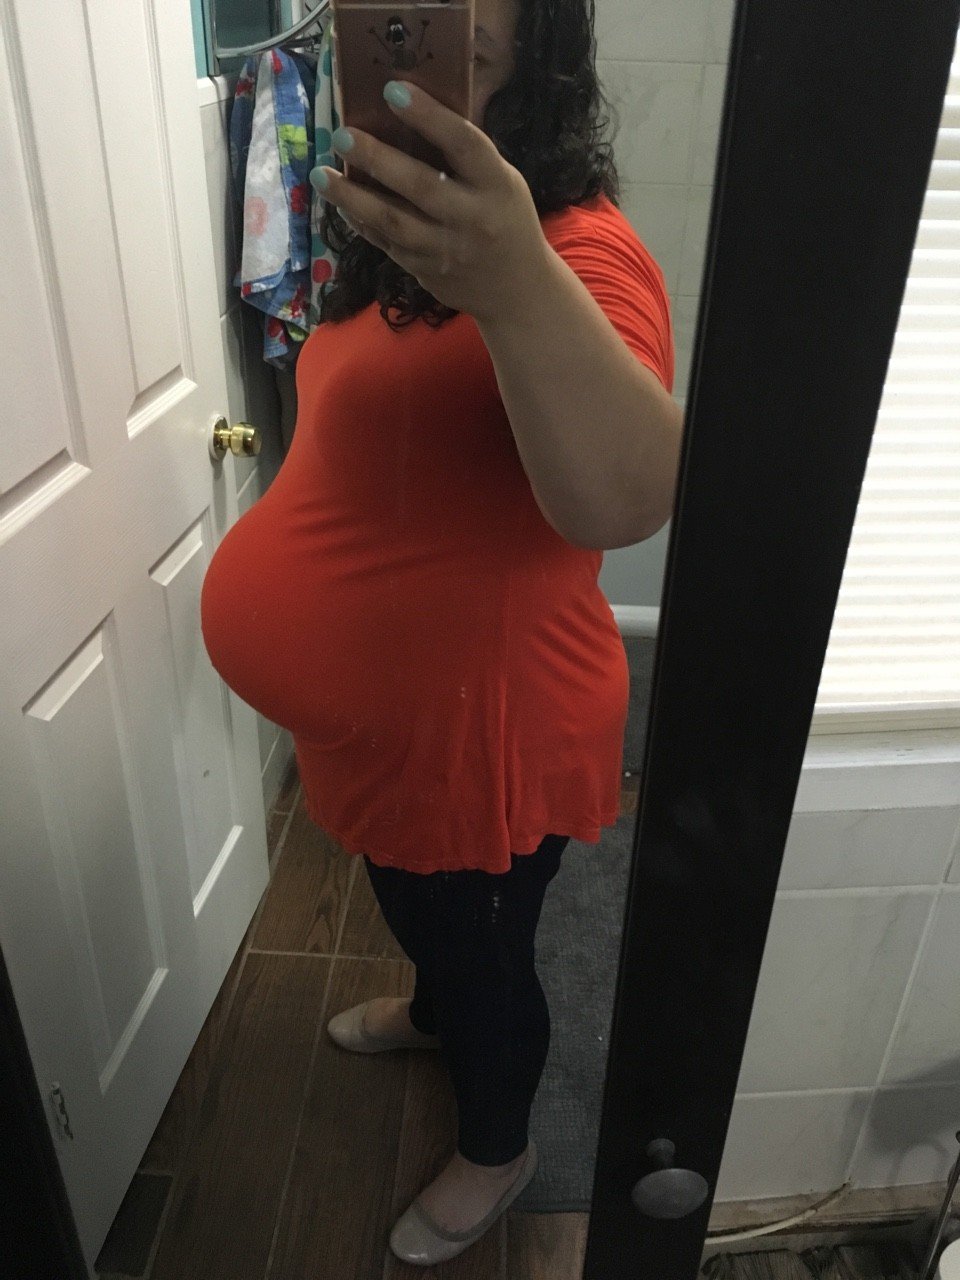 Photo by preggoalways with the username @preggoalways,  September 1, 2016 at 6:12 PM and the text says 'Previous pregnancy #preggoalways  #pregnancy  #fetish  #pregnant  #preggo  #pregnancy  #pregnancy  #blog  #pregnancy  #glow  #fertile  #hucow  #hucow  #life  #big  #belly  #big  #tits  #big  #boobs  #huge  #belly  #huge  #baby  #bump  #big  #baby  #belly ..'